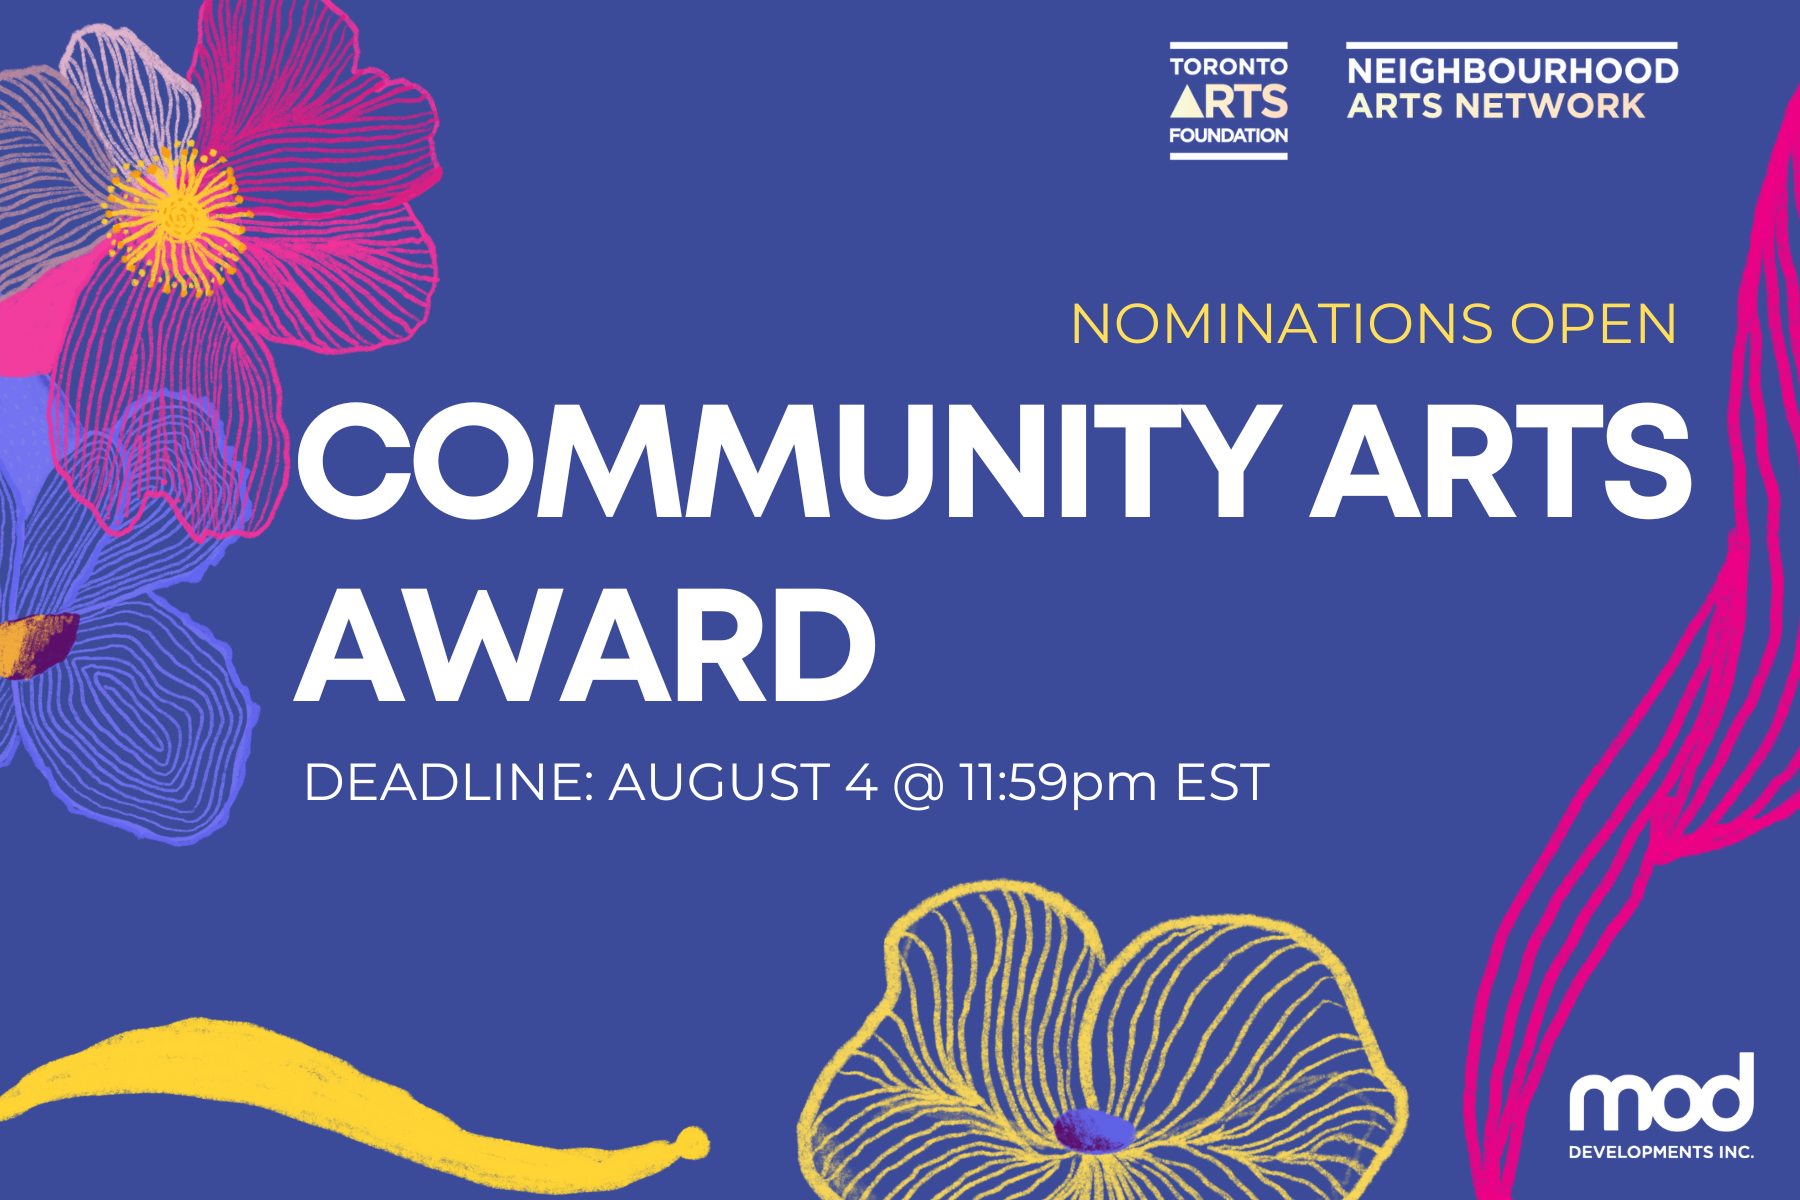 infographic for the Community Arts Award. Nominations close July 18, 2022